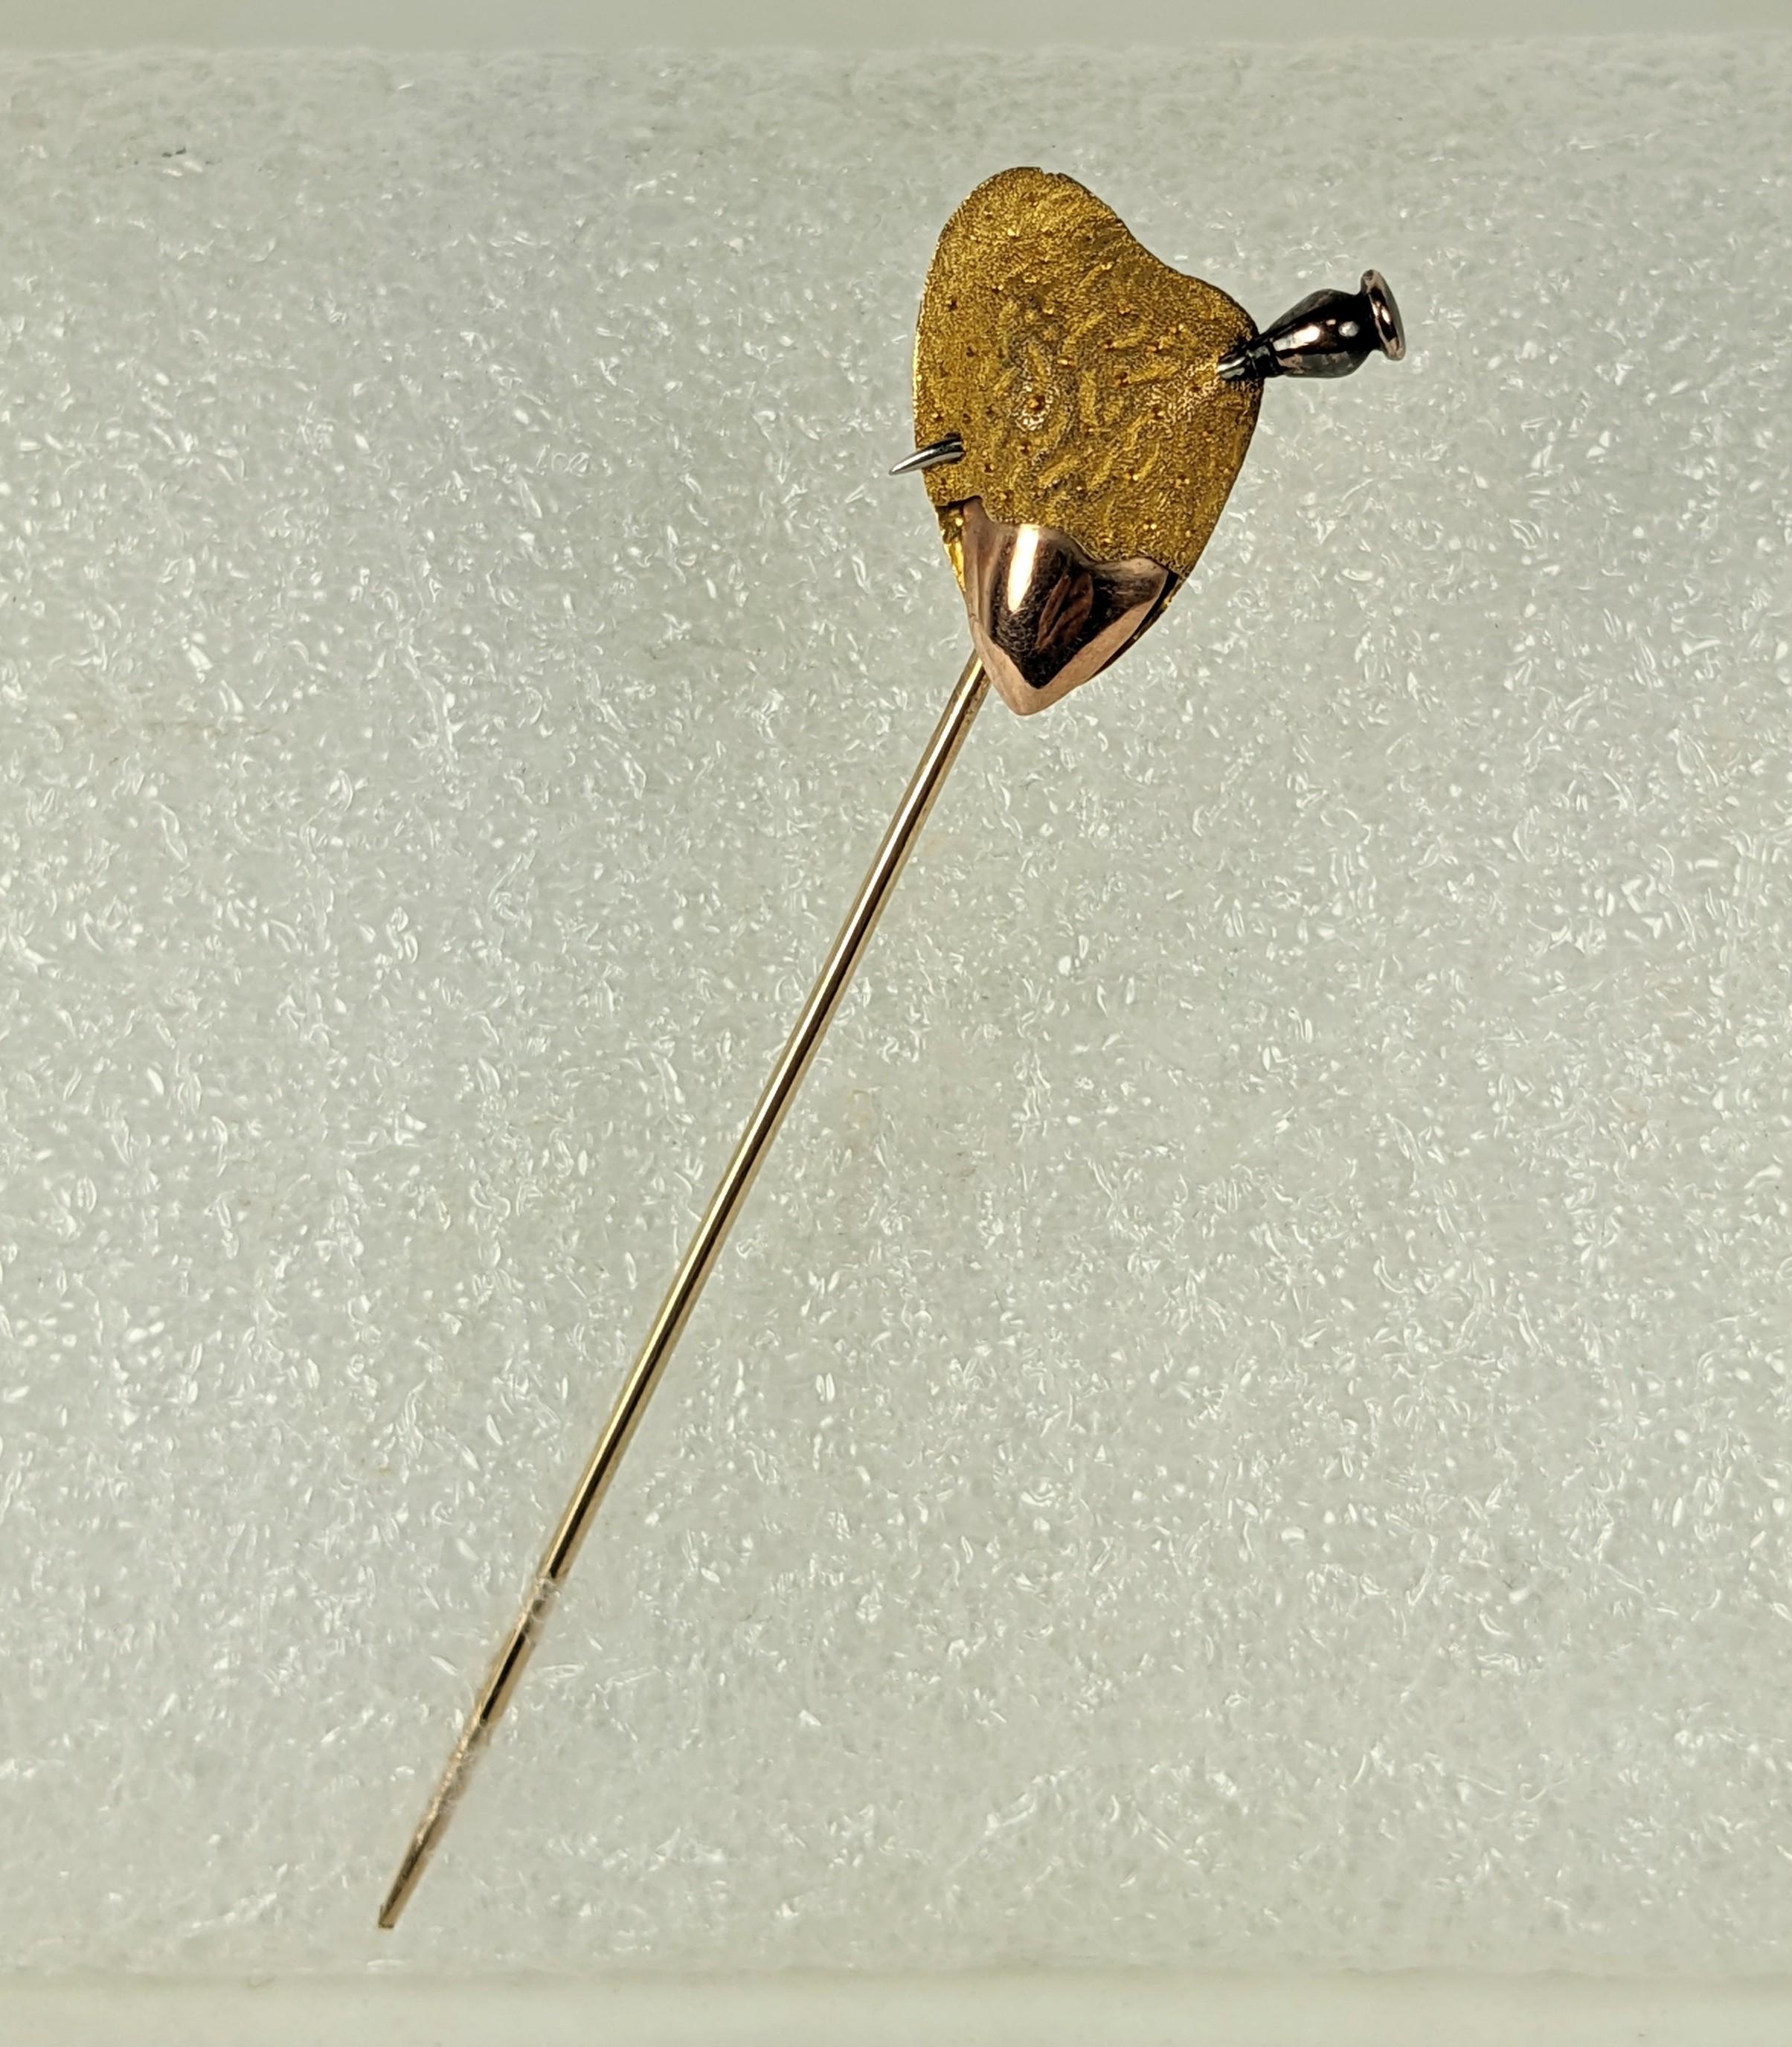 Unusual Victorian Pecan Stickpin in 14k gold from the 19th Century. Hand crafted of textured yellow gold, pink gold with a white and pink gold spike. Unusual subject matter, were not sure of the meaning but beautifully crafted miniature from the